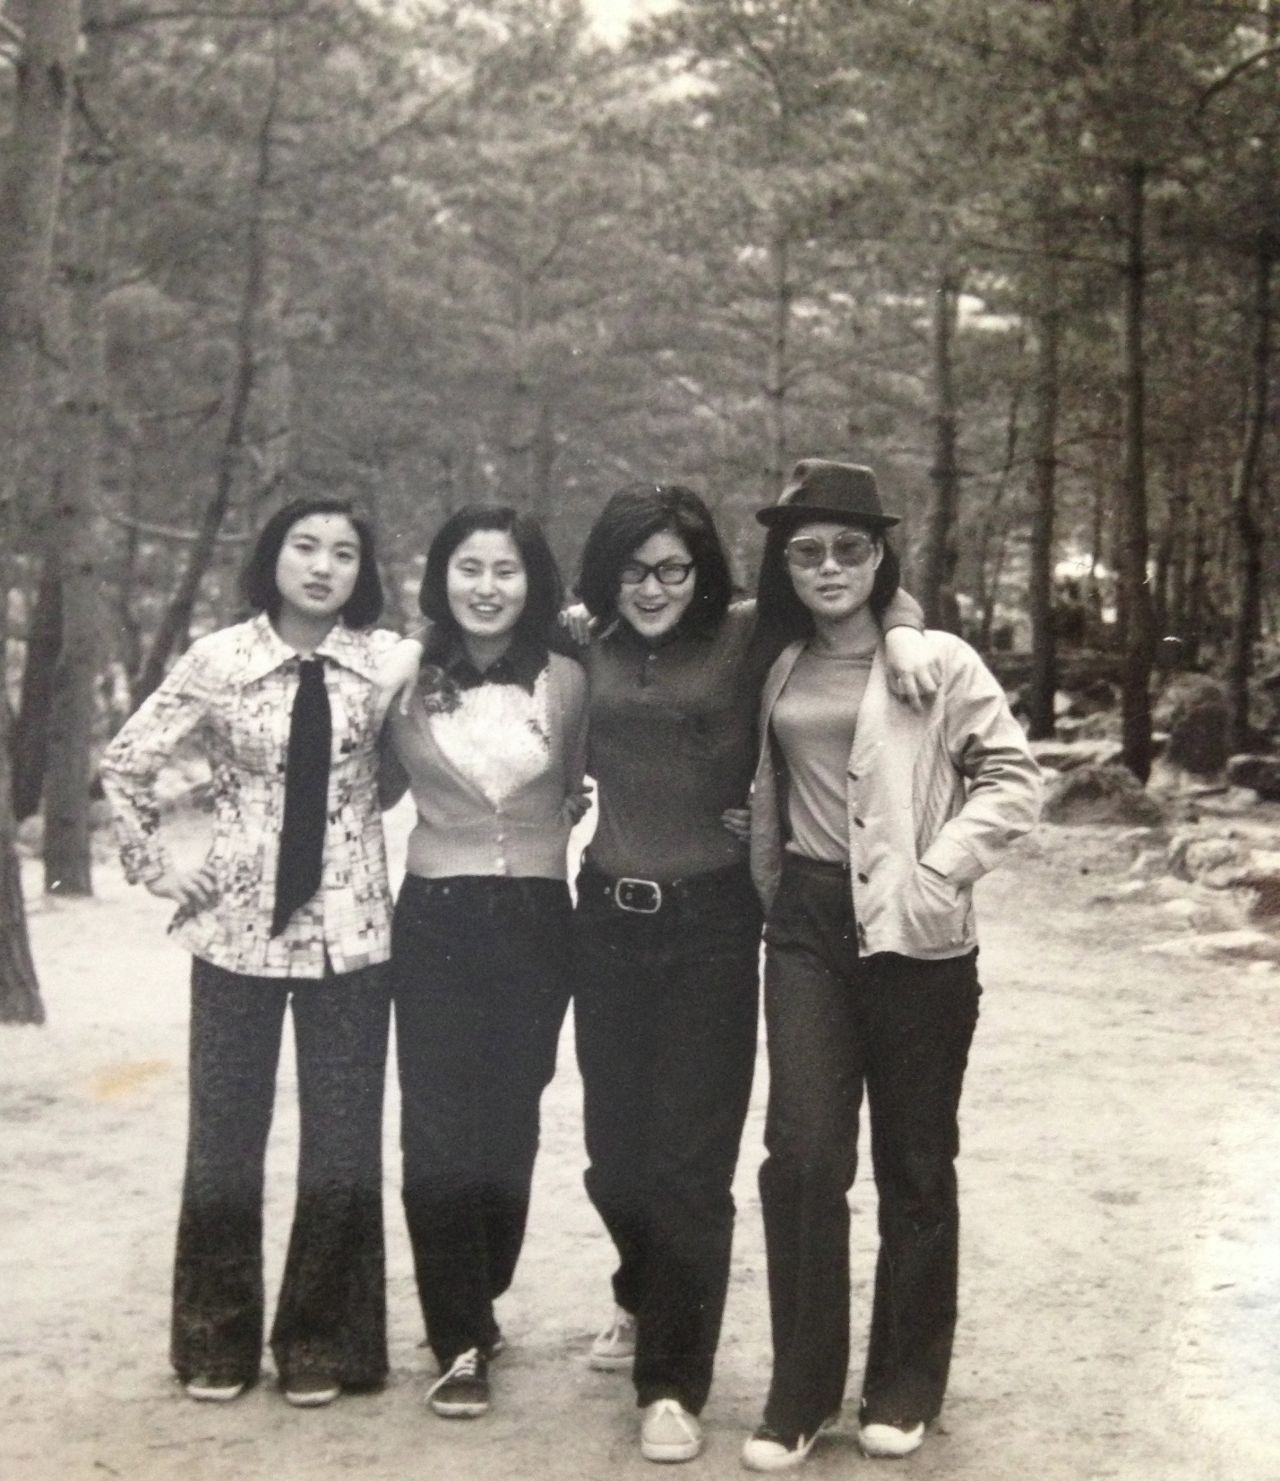 <a href="http://ireport.cnn.com/docs/DOC-948735">Dominica Lim's mom</a>, far left, wears a tie and bell-bottom pants as she poses for a picture with her friends in South Korea in 1969. "I think the fashion of the 1960s was very classy with a touch of fun," Lim says.